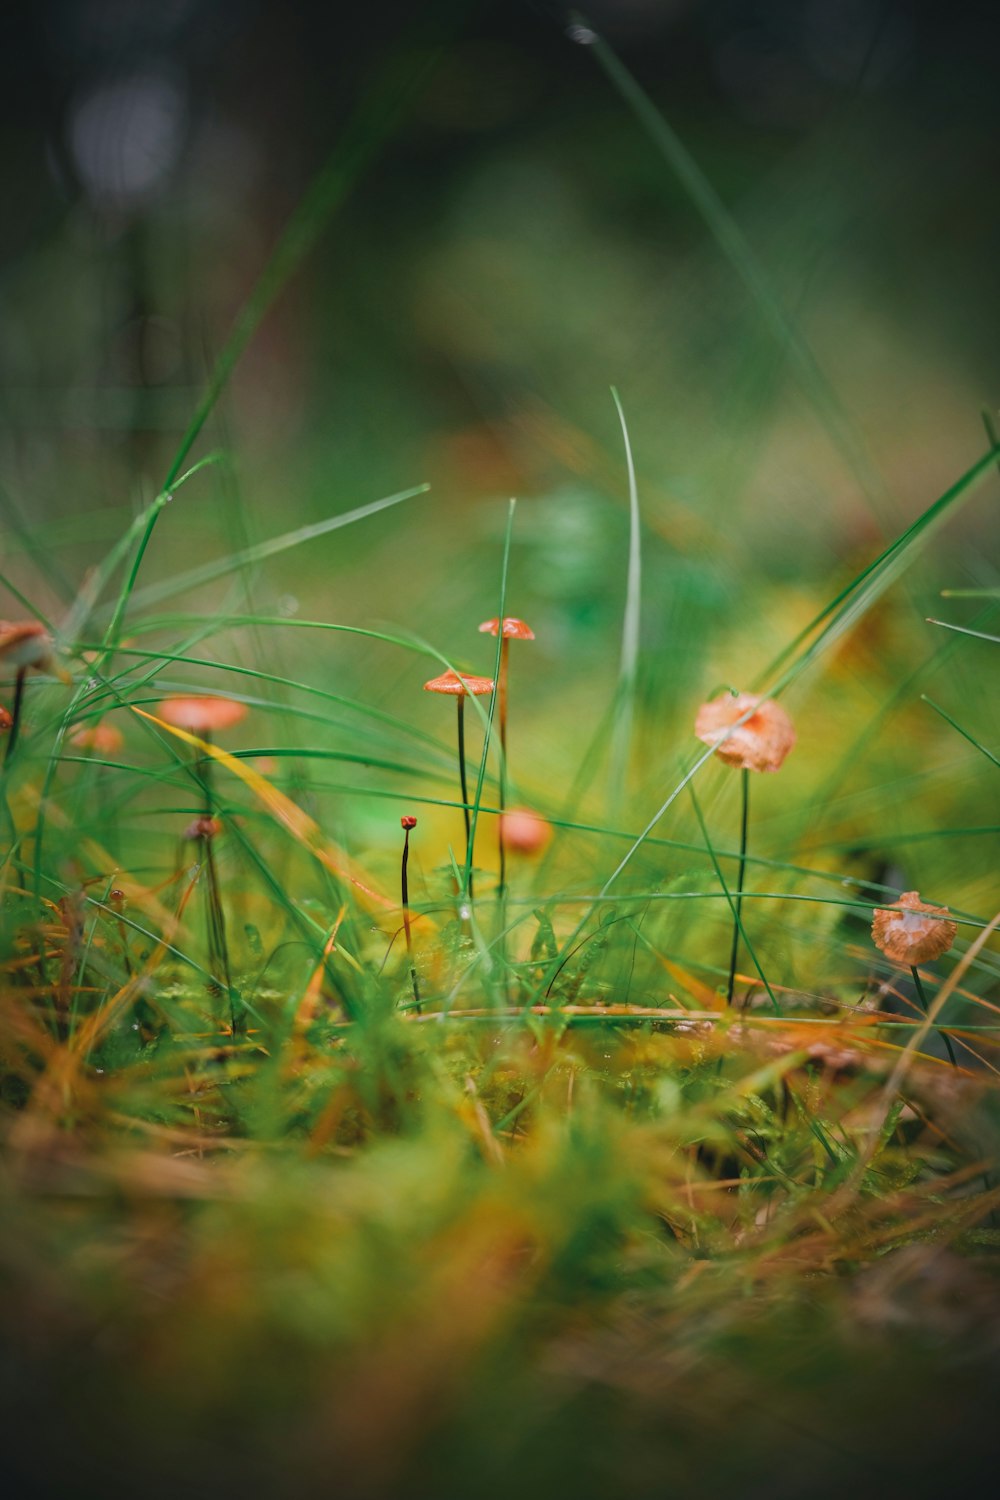 a close up of some small flowers in the grass